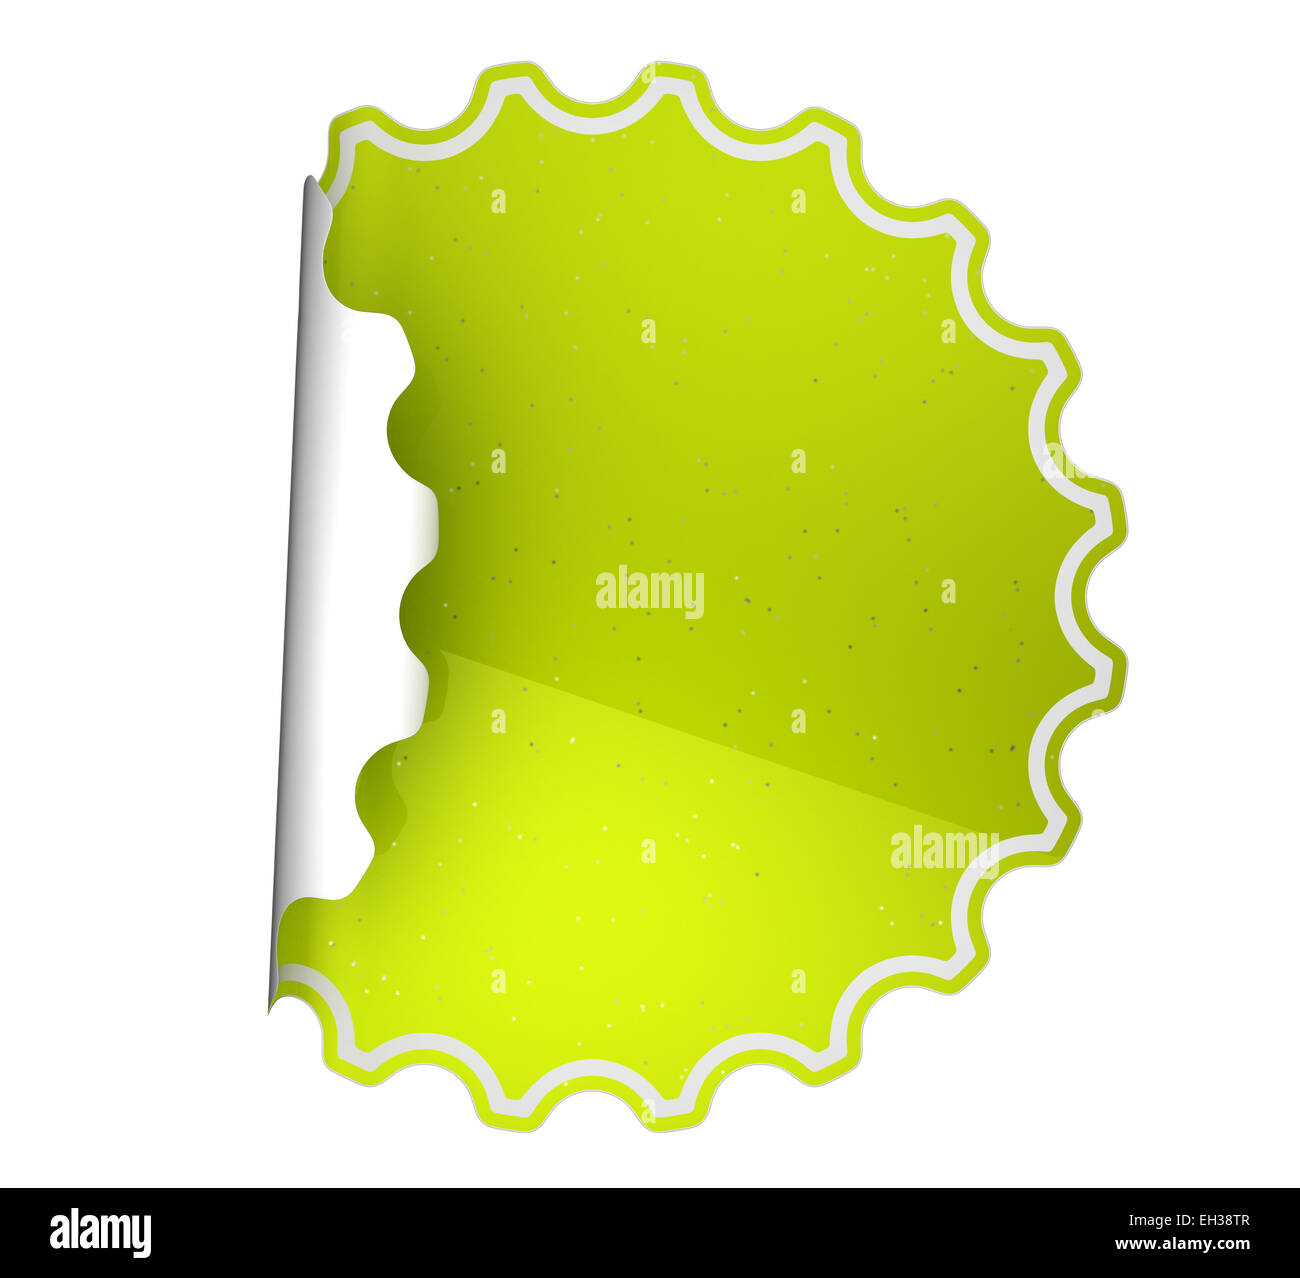 Price Dots and Label Stickers  Price Tag Stickers – Royal Green Market